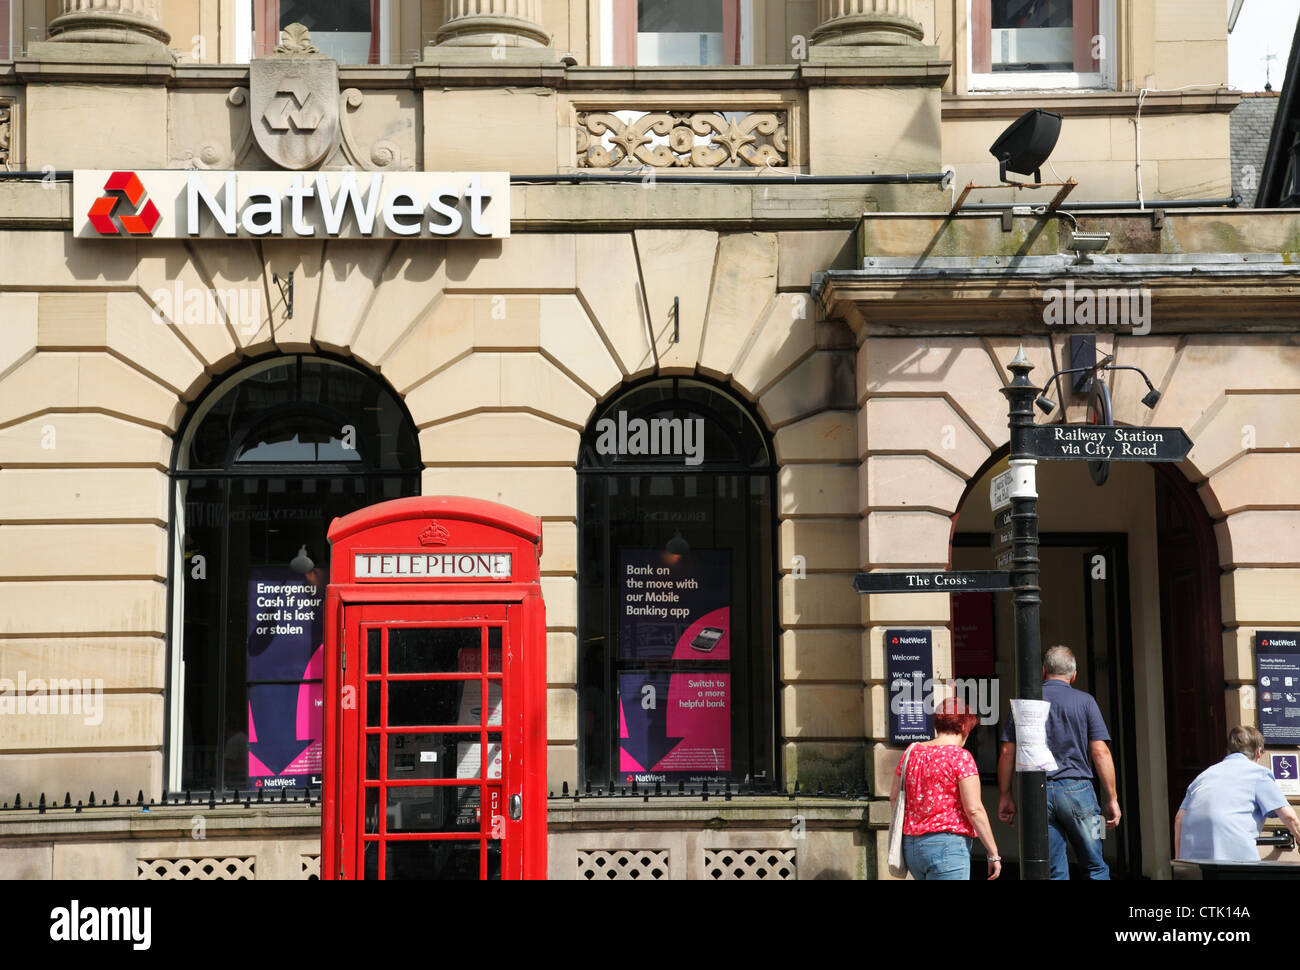 The NatWest Bank, Eastgate Street, Chester, England, U.K. Stock Photo